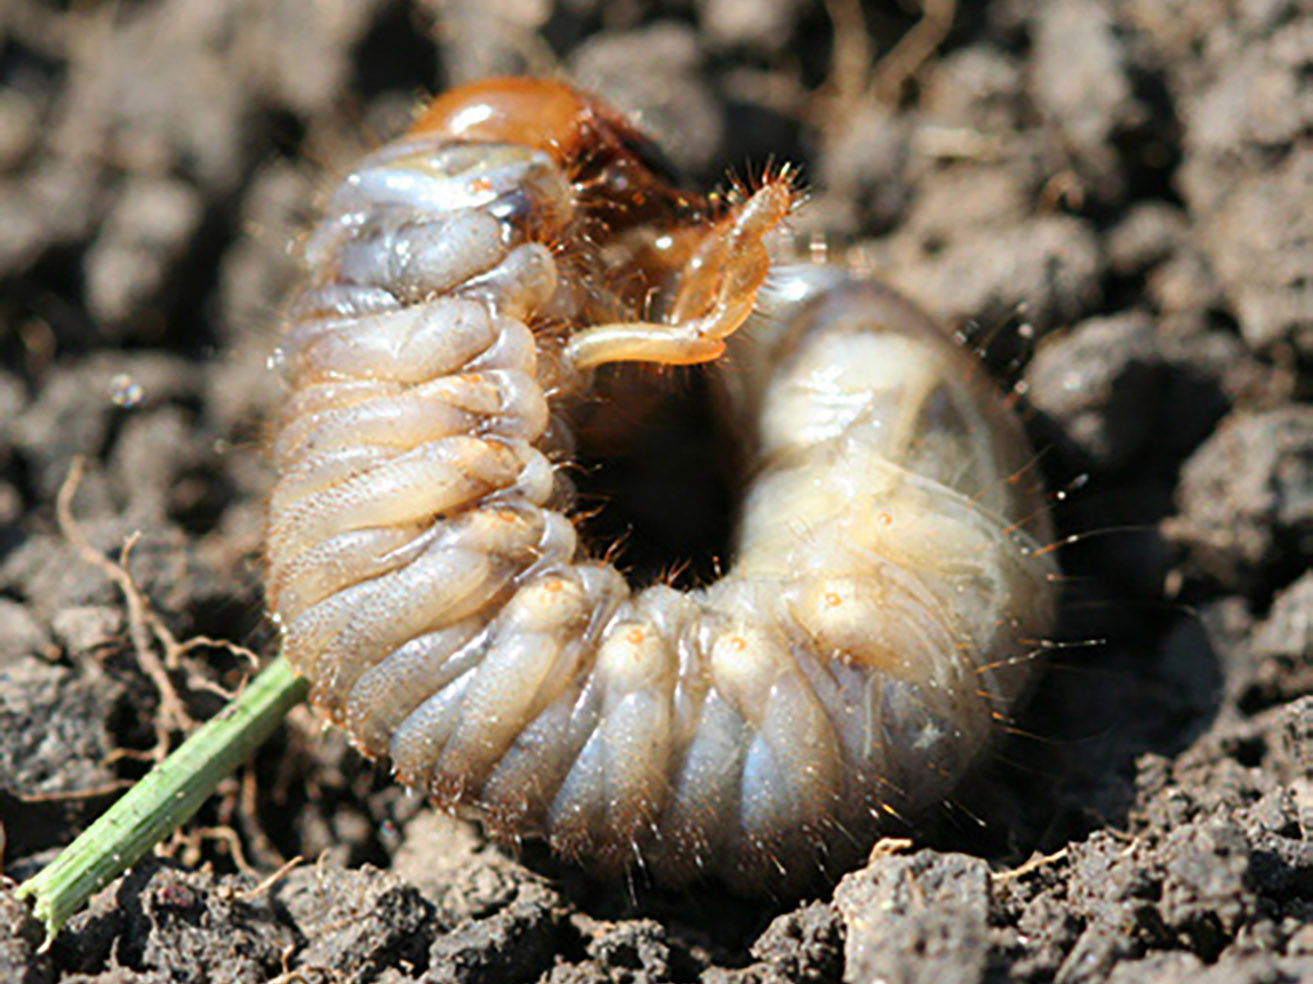 Fig. 2. The white grub immature stage (larva) forms a C-shape when at rest in the soil. Image courtesy of Erin Hodgson, Department of Entomology, Iowa State University.